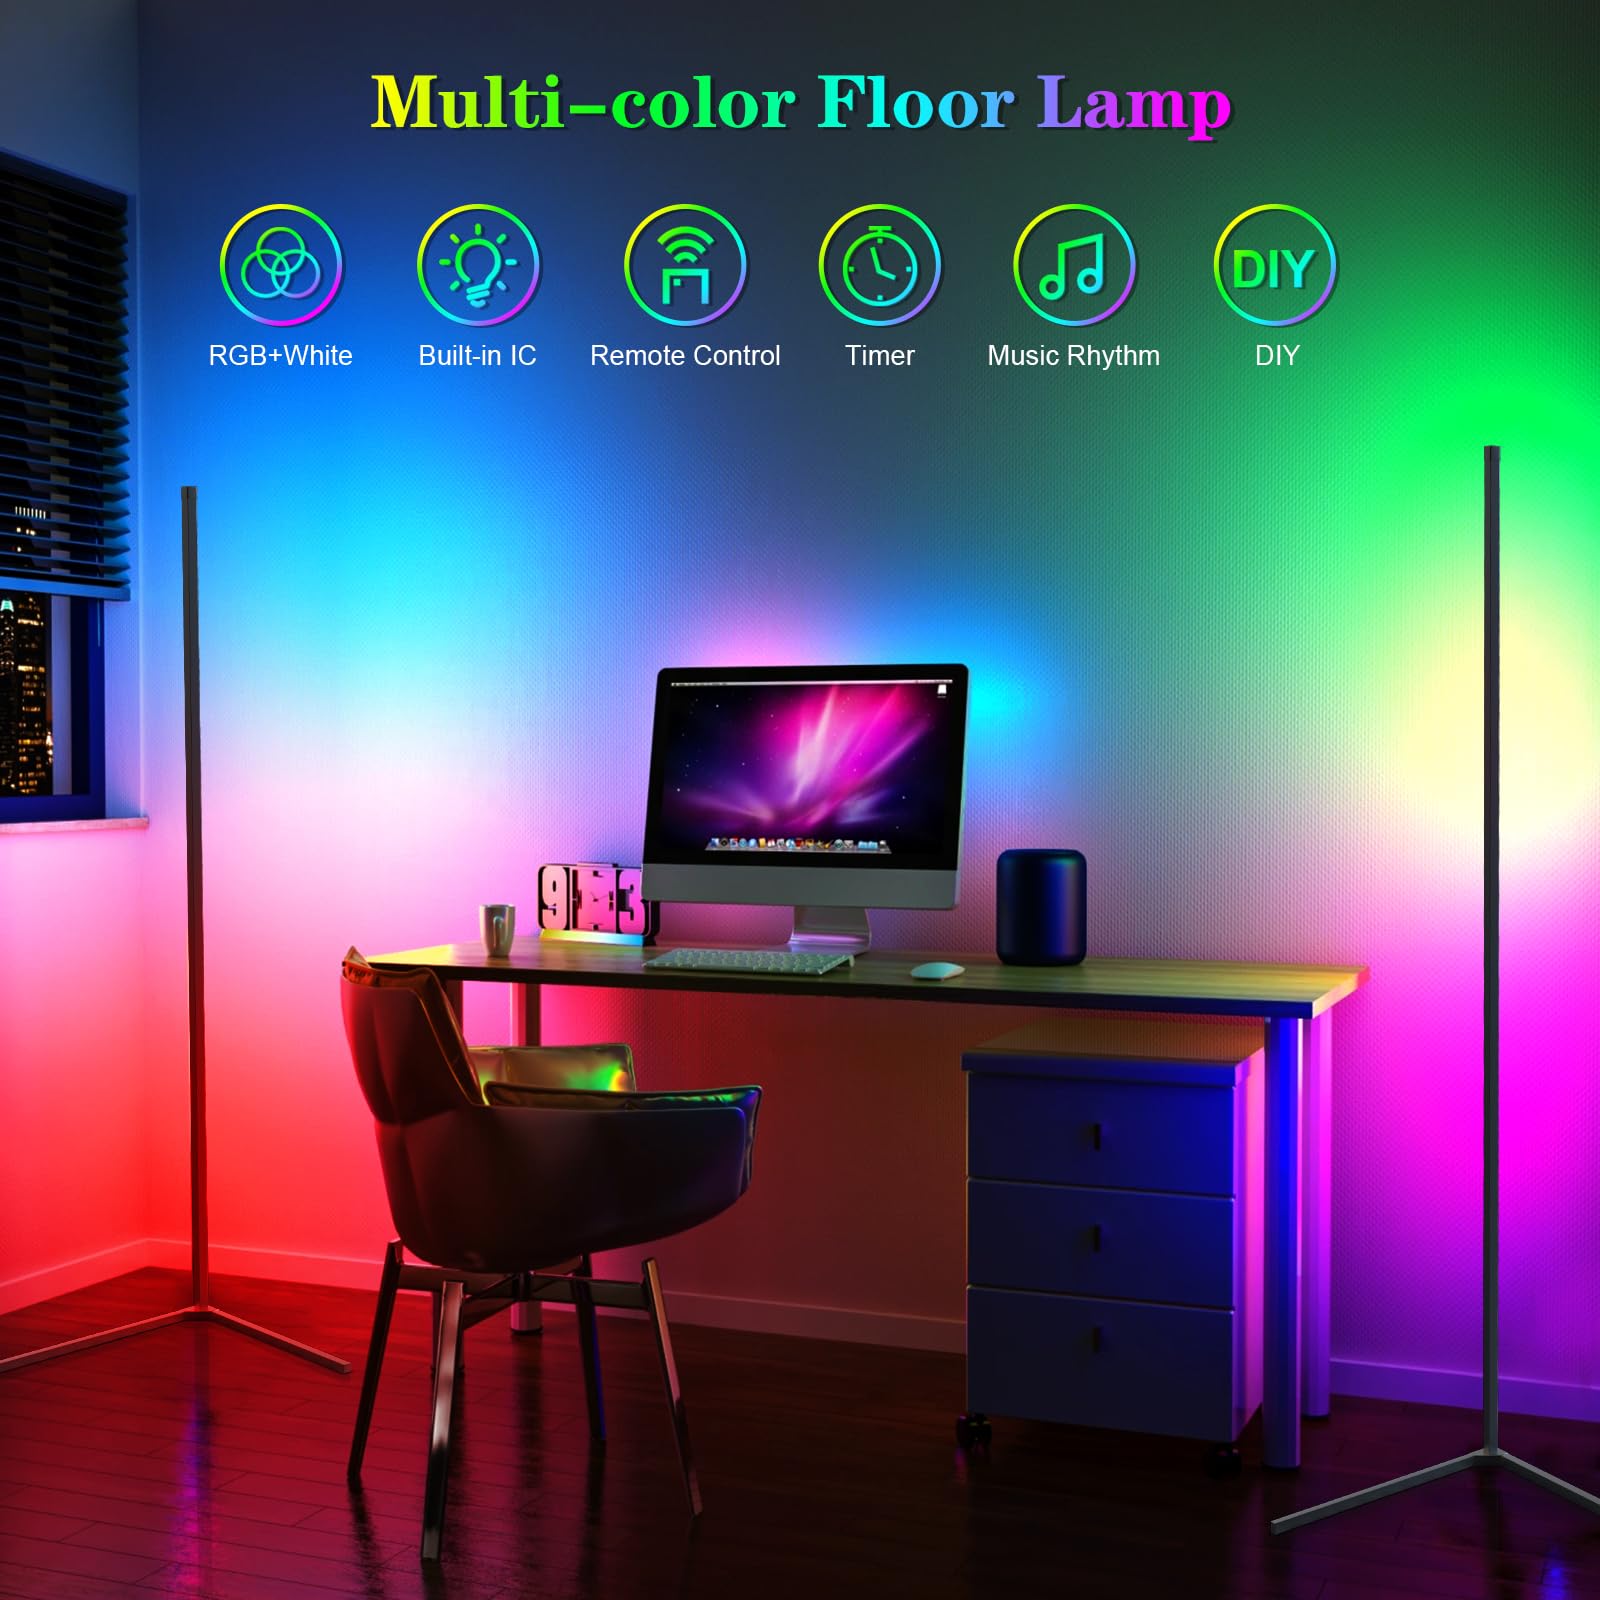 Fntek 2 Pack RGB Corner Floor Lamp, 56" Color Changing Led Corner Lamp with Remote, Music Sync& Timing, Dimmable Modern Mood Lighting RGB Floor Lamp for Bedroom Living Room Gaming Room